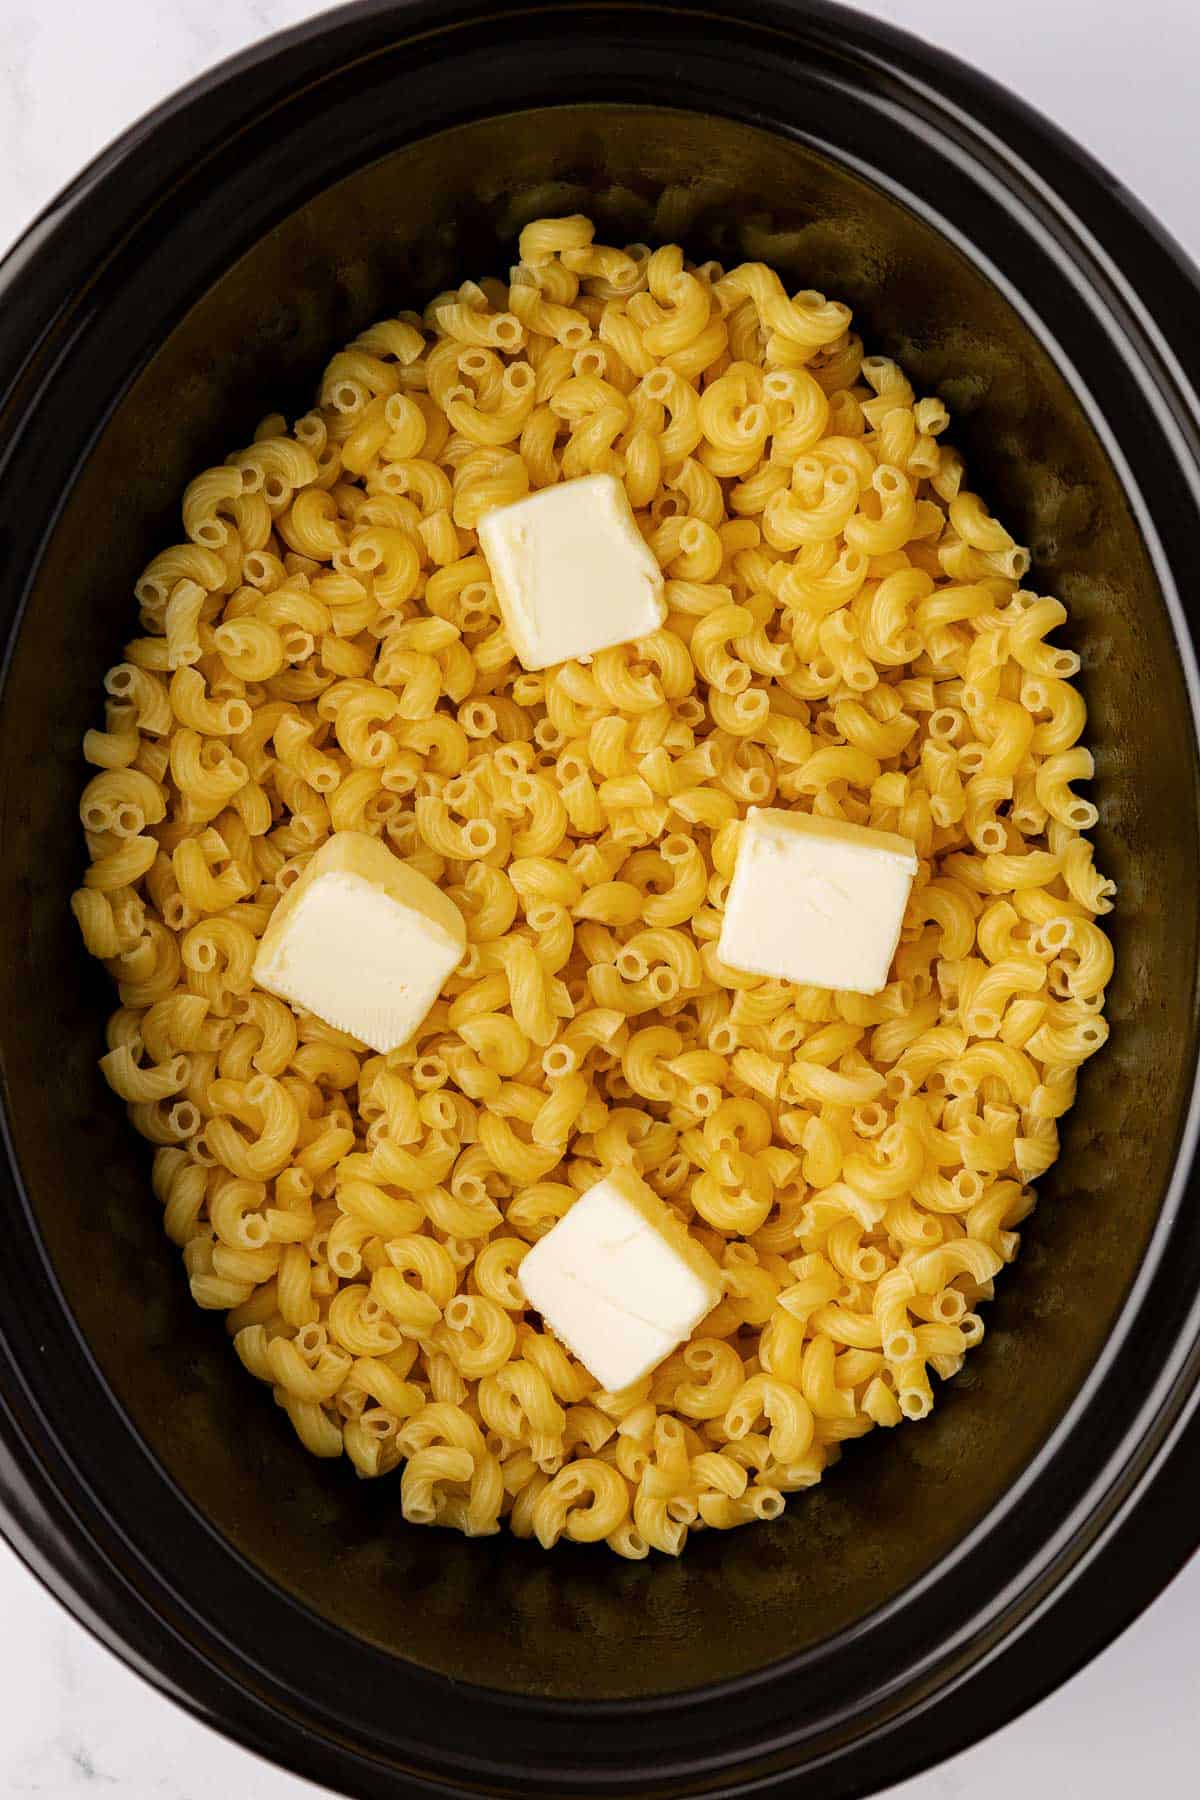 butter on macaroni noodles in a crock pot